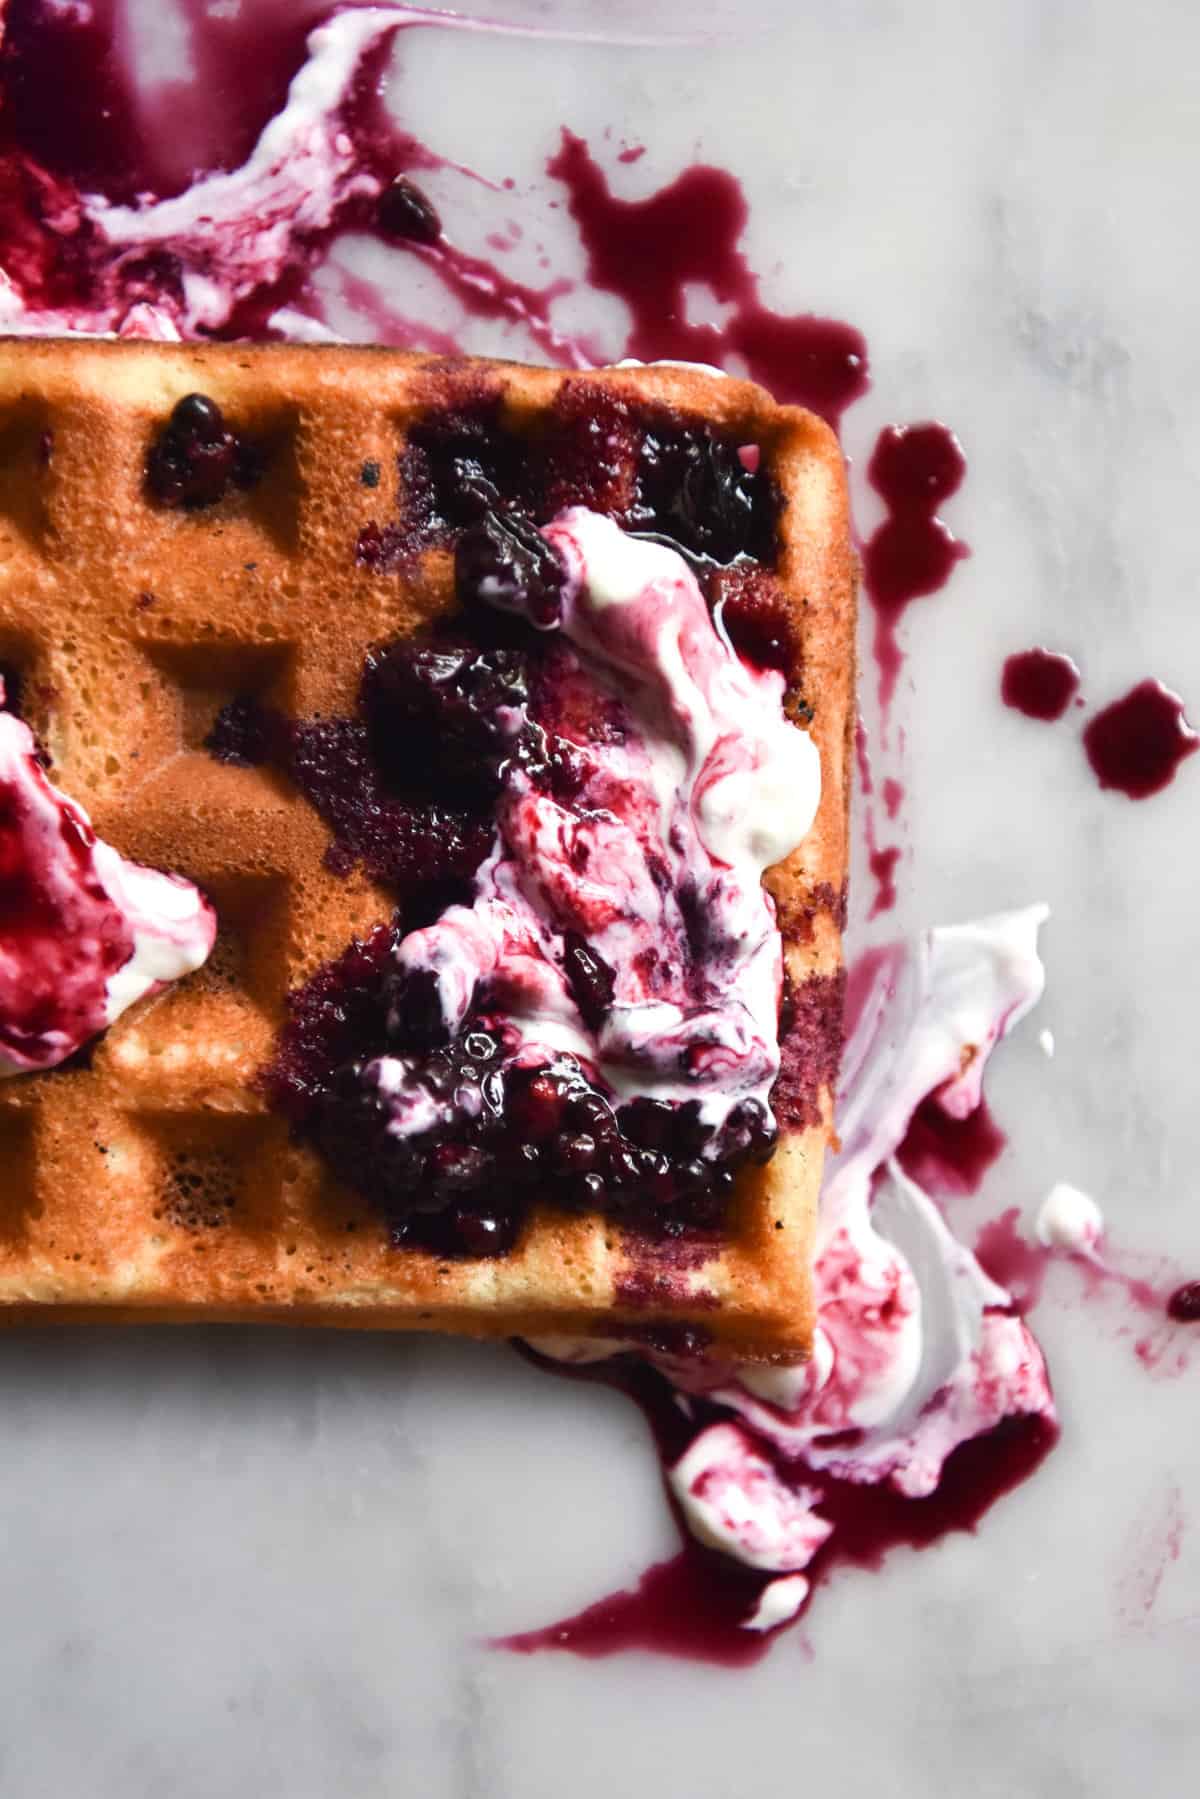 An aerial image of a gluten free waffle atop a white marble table. The waffle is golden brown and topped with yoghurt and a berry compote which creates a beautiful marbled pattern over the waffle and the table.